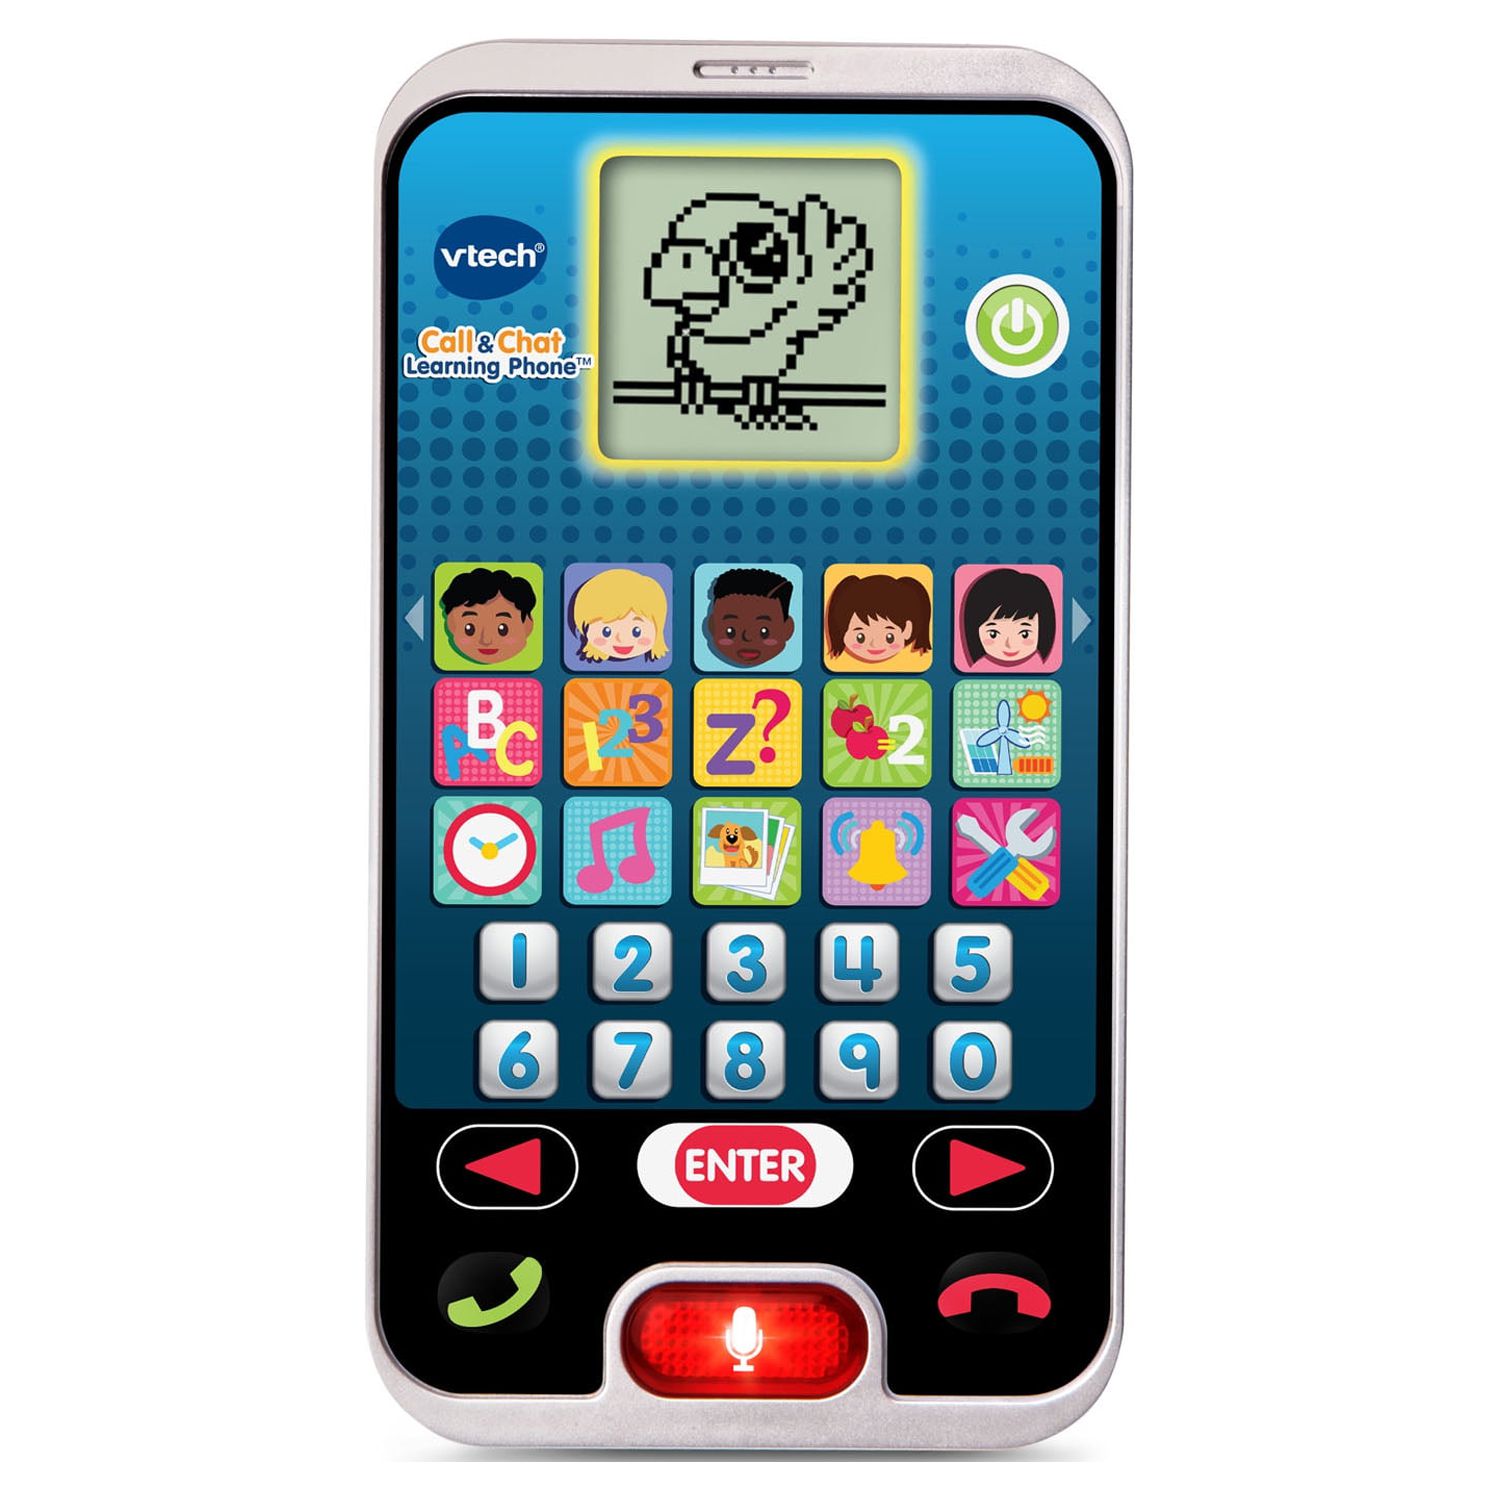 VTech Call and Chat Learning Phone, Pretend Play Toy Phone for Toddlers - image 1 of 7